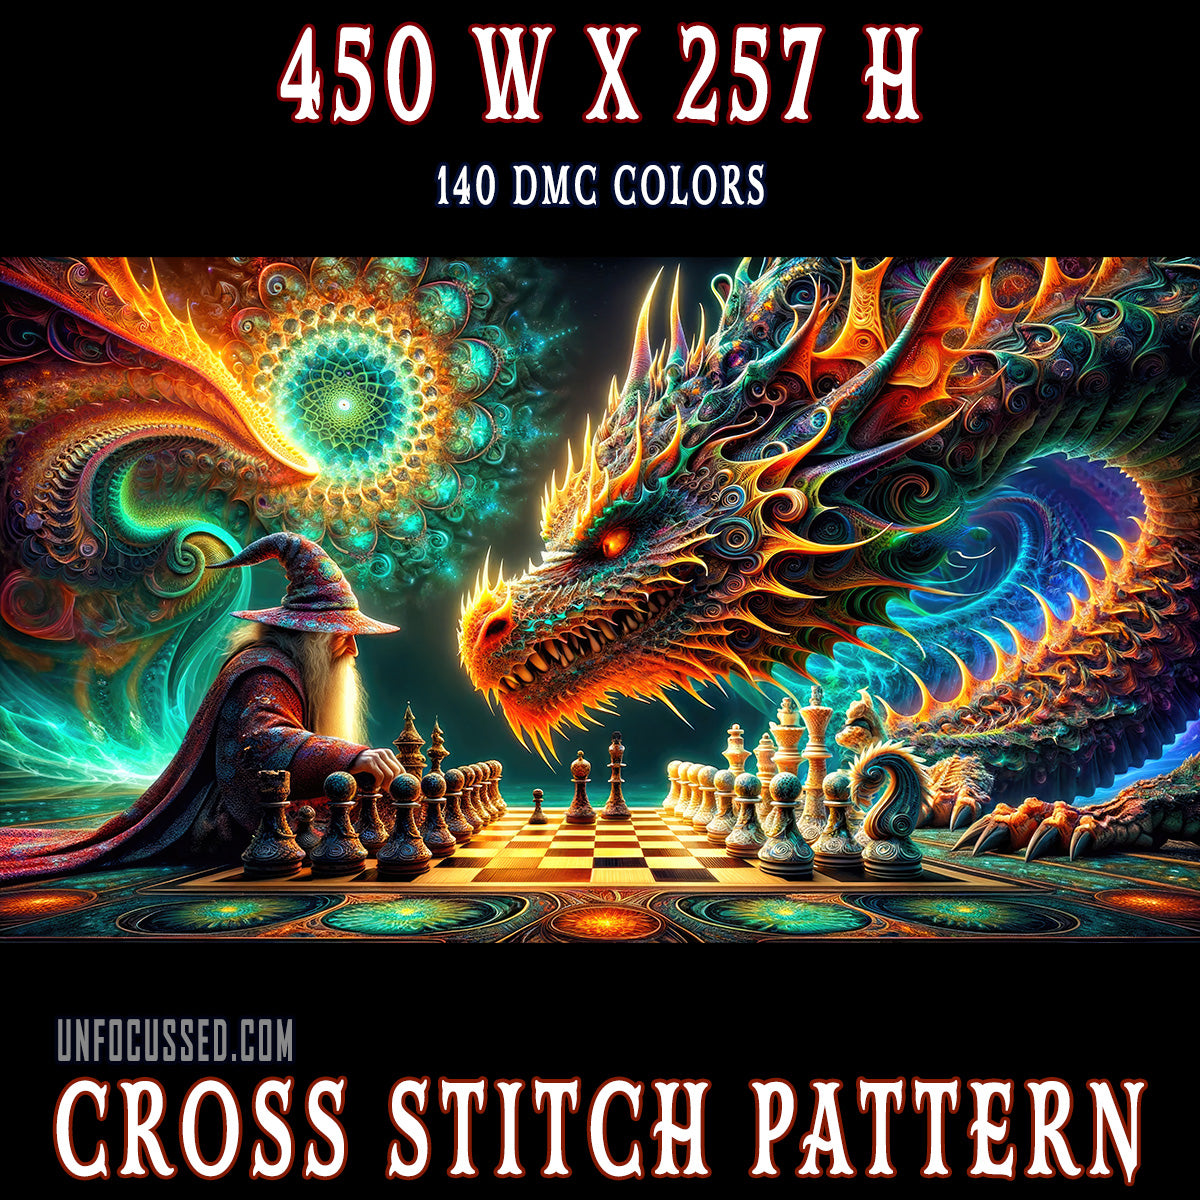 Checkmate of the Cosmic Dragon Cross Stitch Pattern